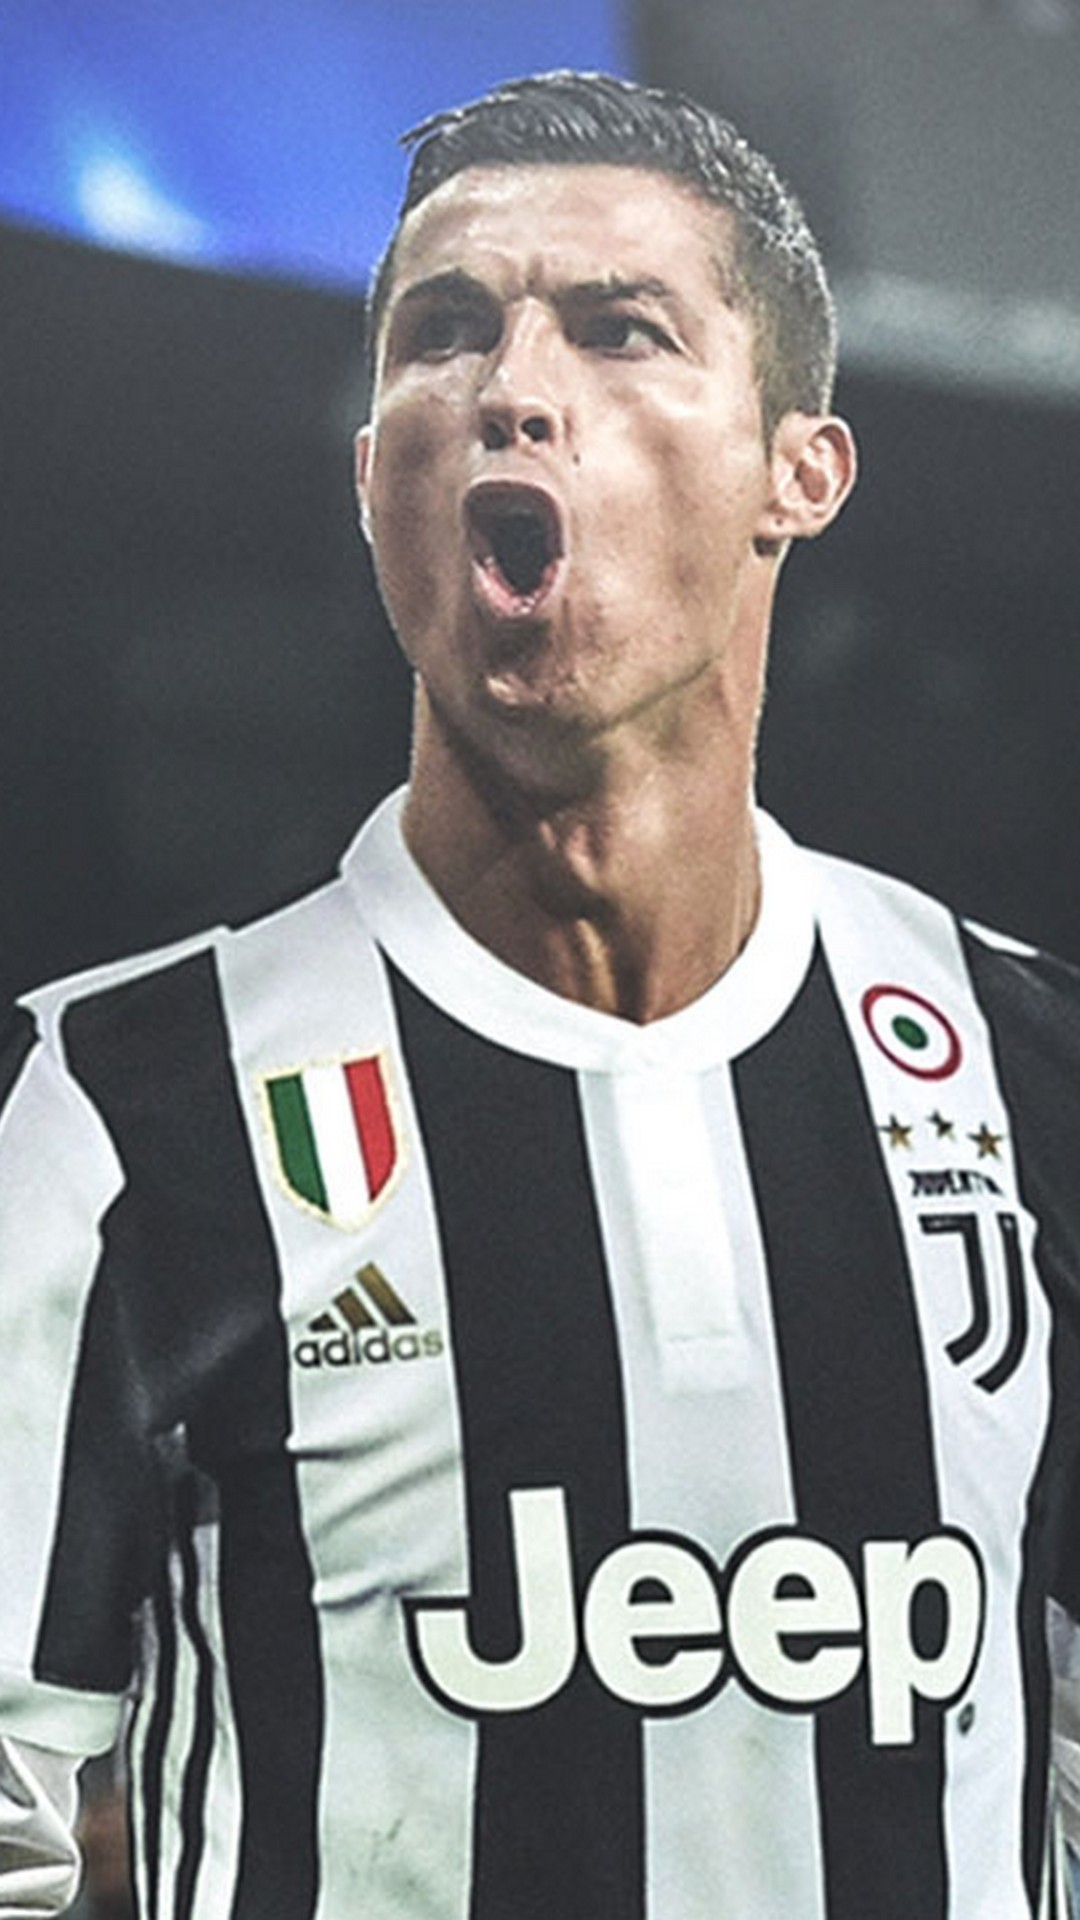 Cristiano Ronaldo Juventus Wallpaper For iPhone with resolution 1080X1920 pixel. You can make this wallpaper for your iPhone 5, 6, 7, 8, X backgrounds, Mobile Screensaver, or iPad Lock Screen